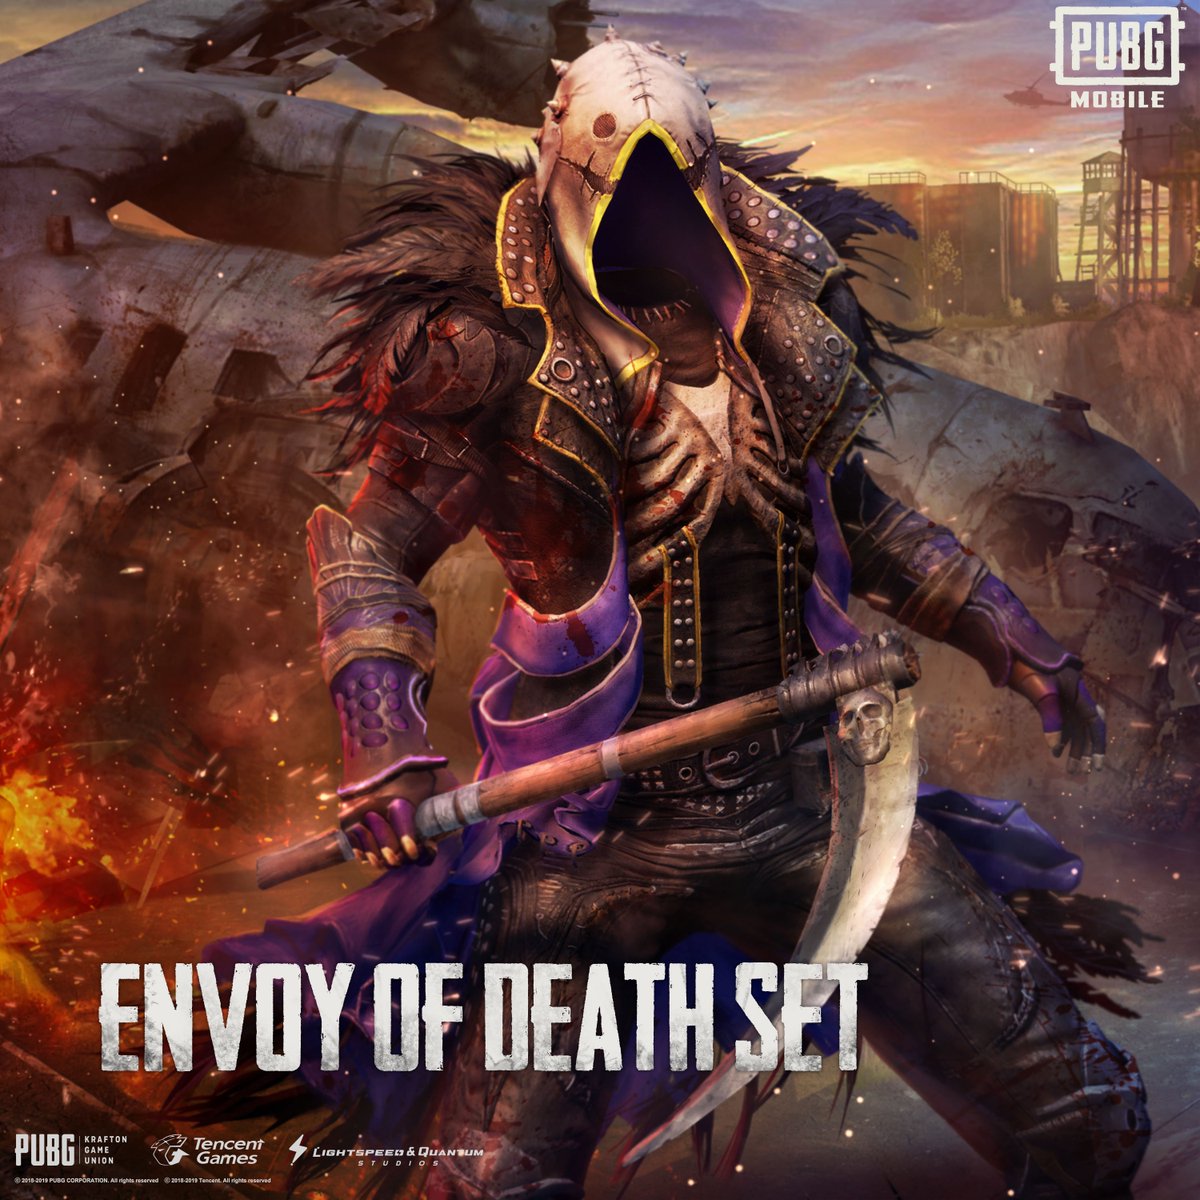 Pubg Mobile If You Re Rocking The Envoy Of Death Set There Is Absolutely No Confusion About What You Ve Come To Do Get Yours Now In Premium Crates T Co Pr7yeef5sm